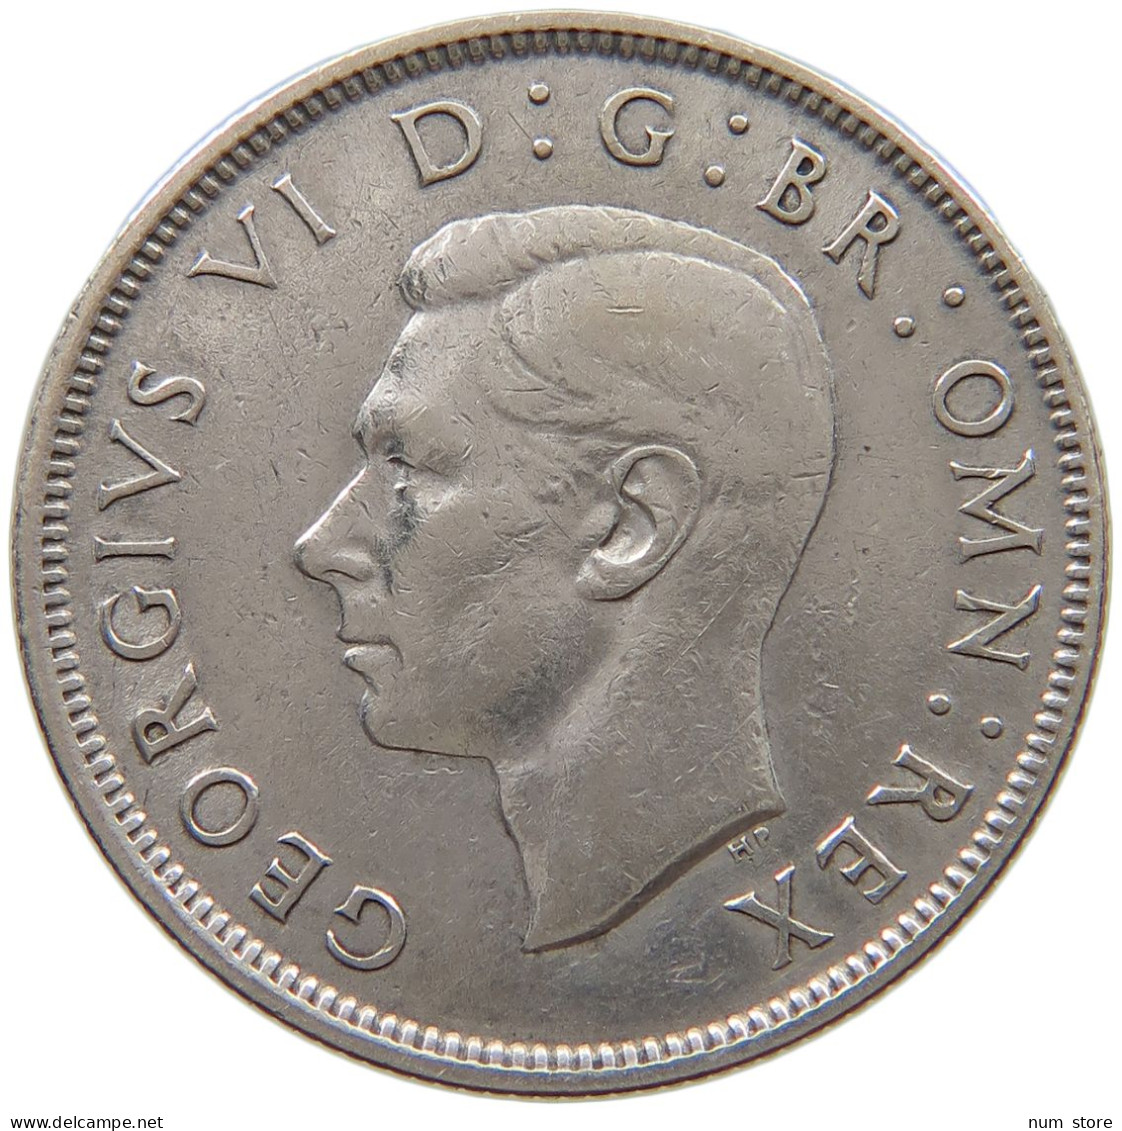 GREAT BRITAIN TWO SHILLINGS 1941 George VI. (1936-1952) #a068 0701 - J. 1 Florin / 2 Shillings